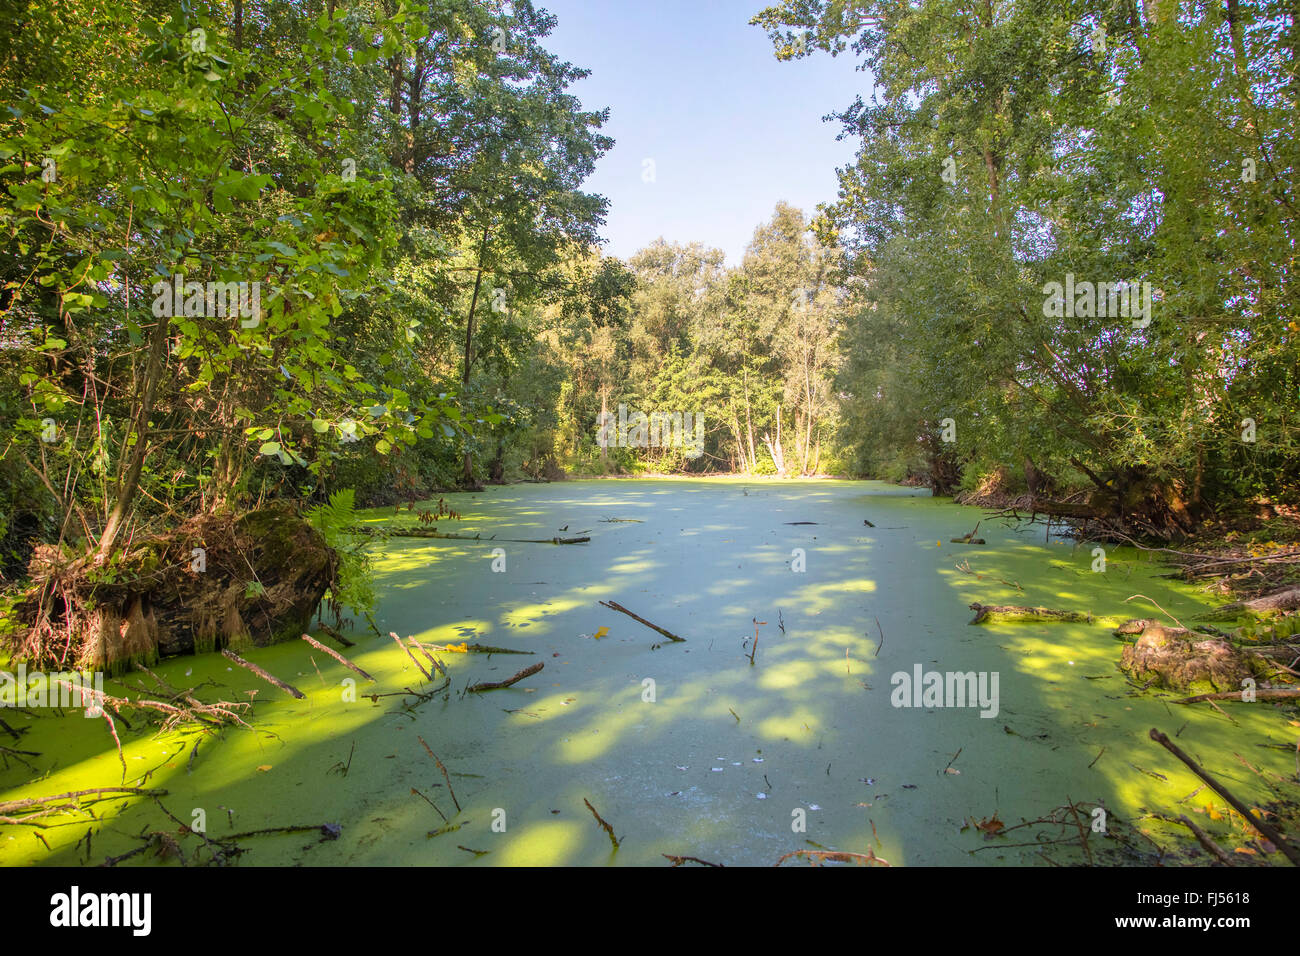 duckweed family (Lemnaceae), pond in forest, covered with duckweed, Germany, Bavaria, Niederbayern, Lower Bavaria Stock Photo